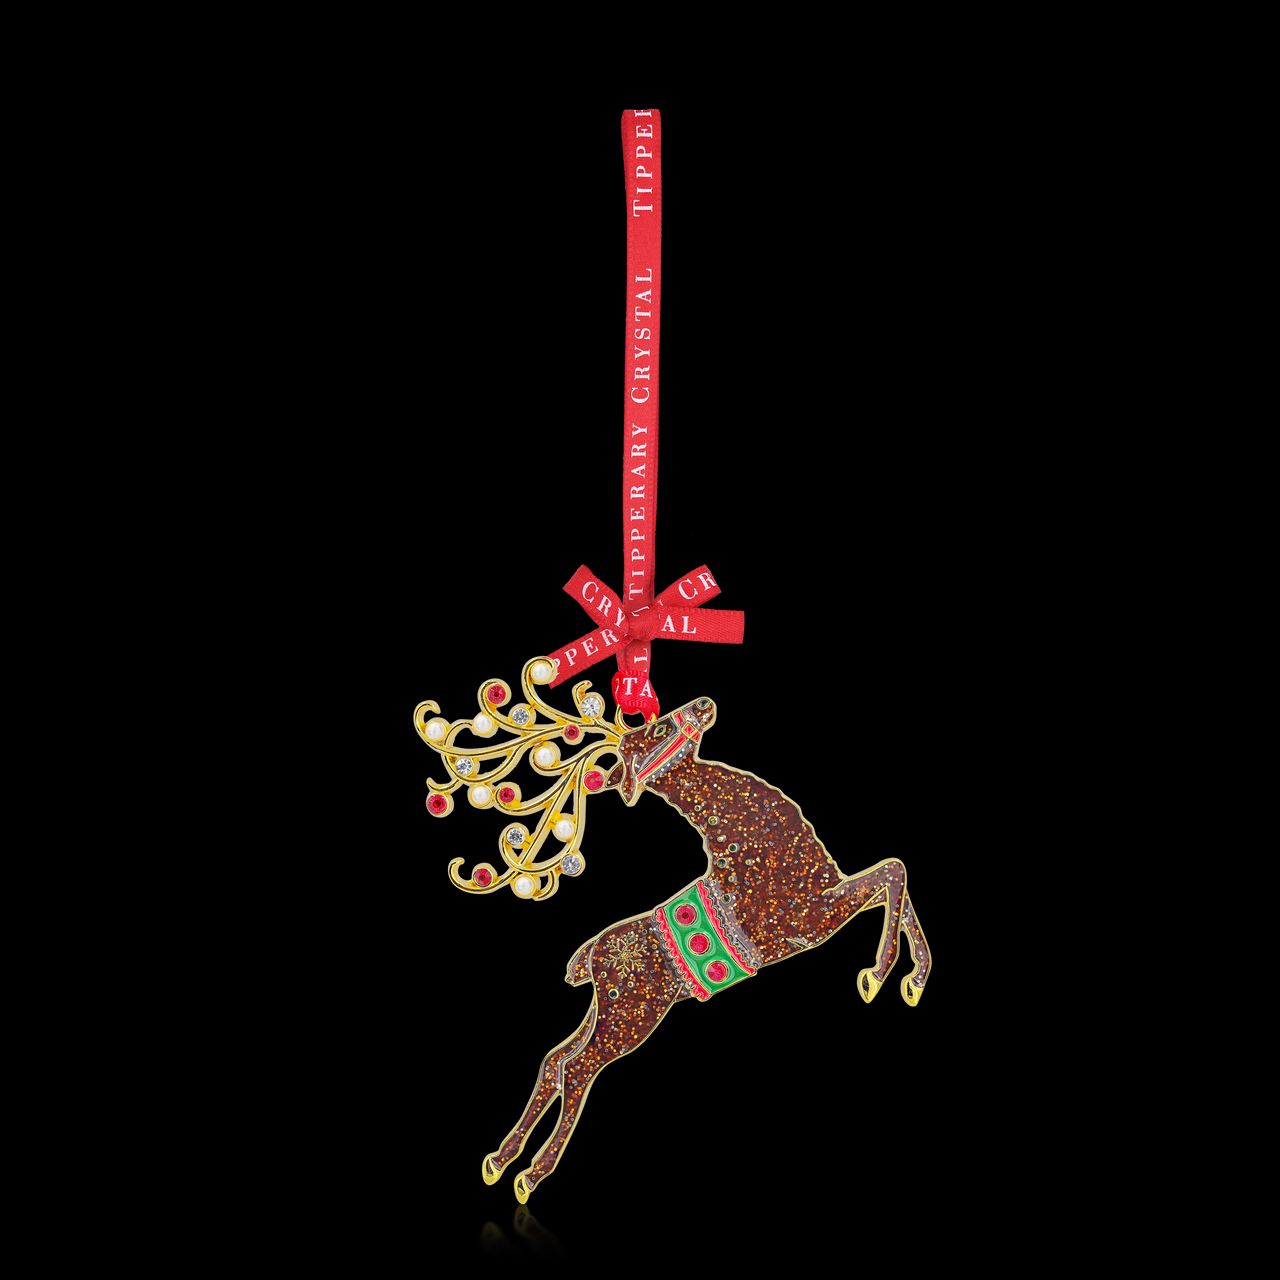 Sparkle Christmas Reindeer Decoration - NEW 2022  We just Love Christmas! The festive season, the giving of gifts, creating memories and being together with family and loved ones. Have lots of fun with our lovingly designed and created Christmas decorations, each one has a magic sparkle of elf dust!